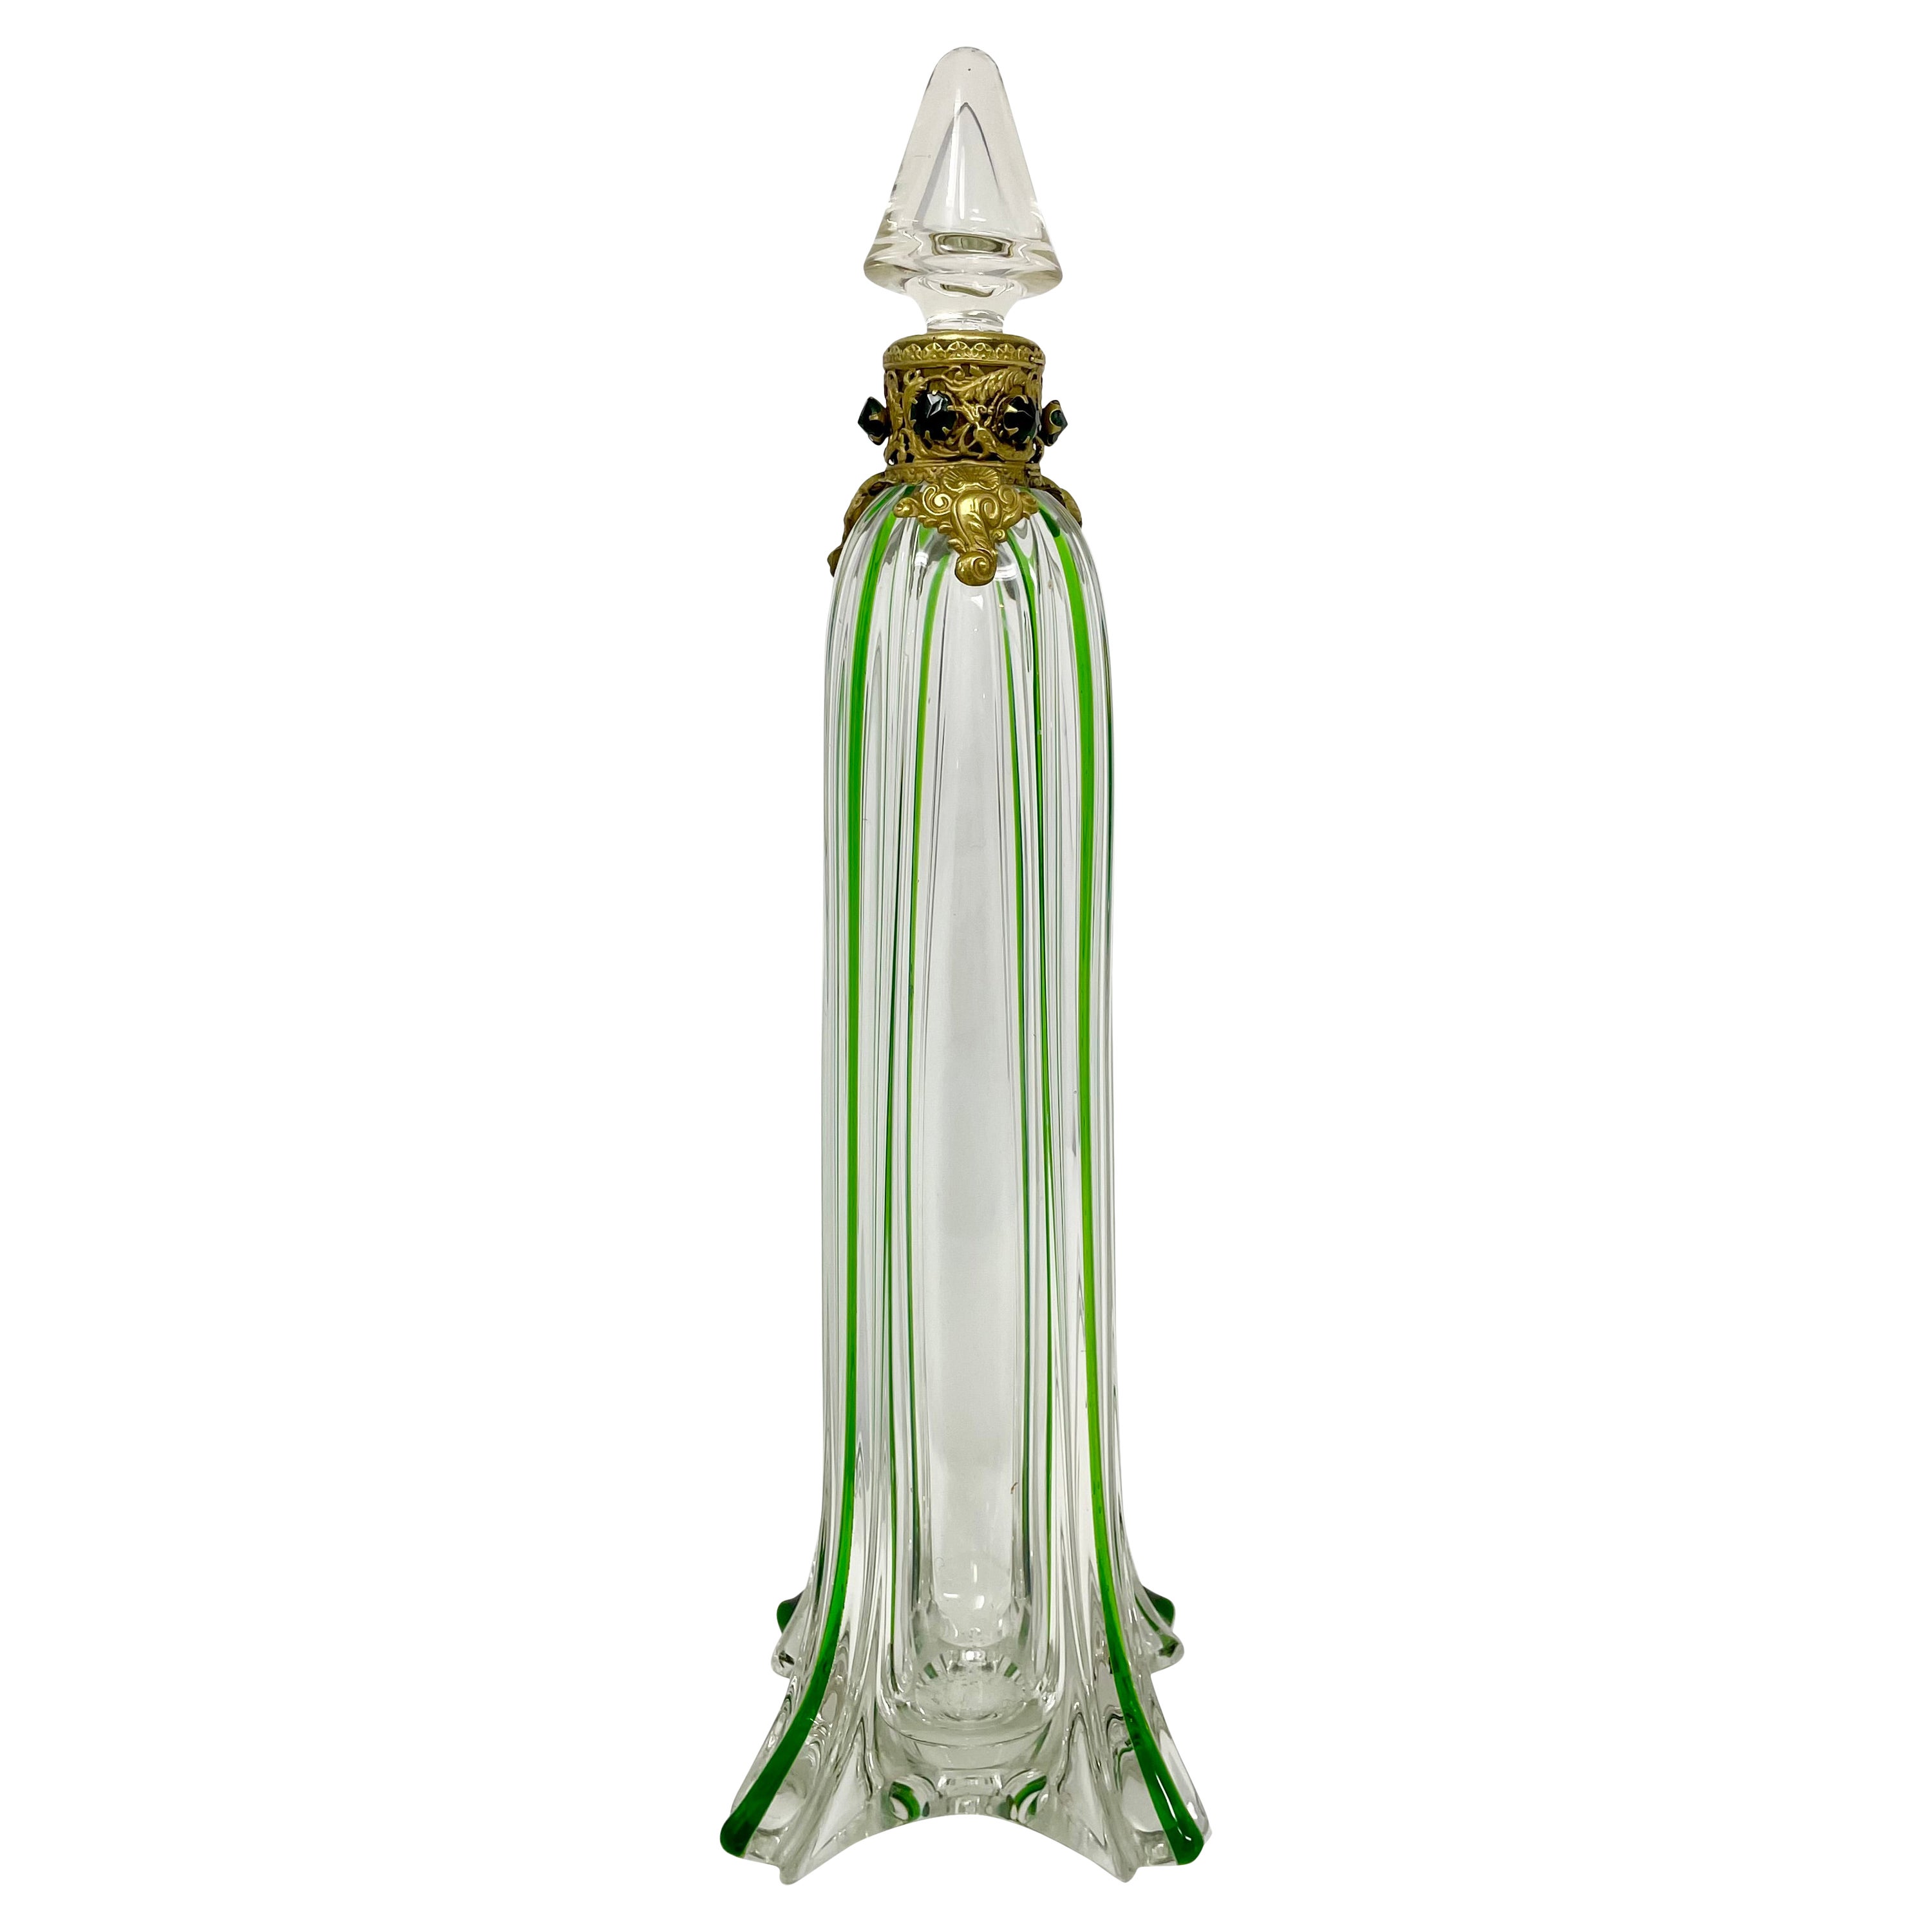 Antique Gold Bronze and Green & Clear Hand-Blown Glass Scent Bottle, Circa 1900